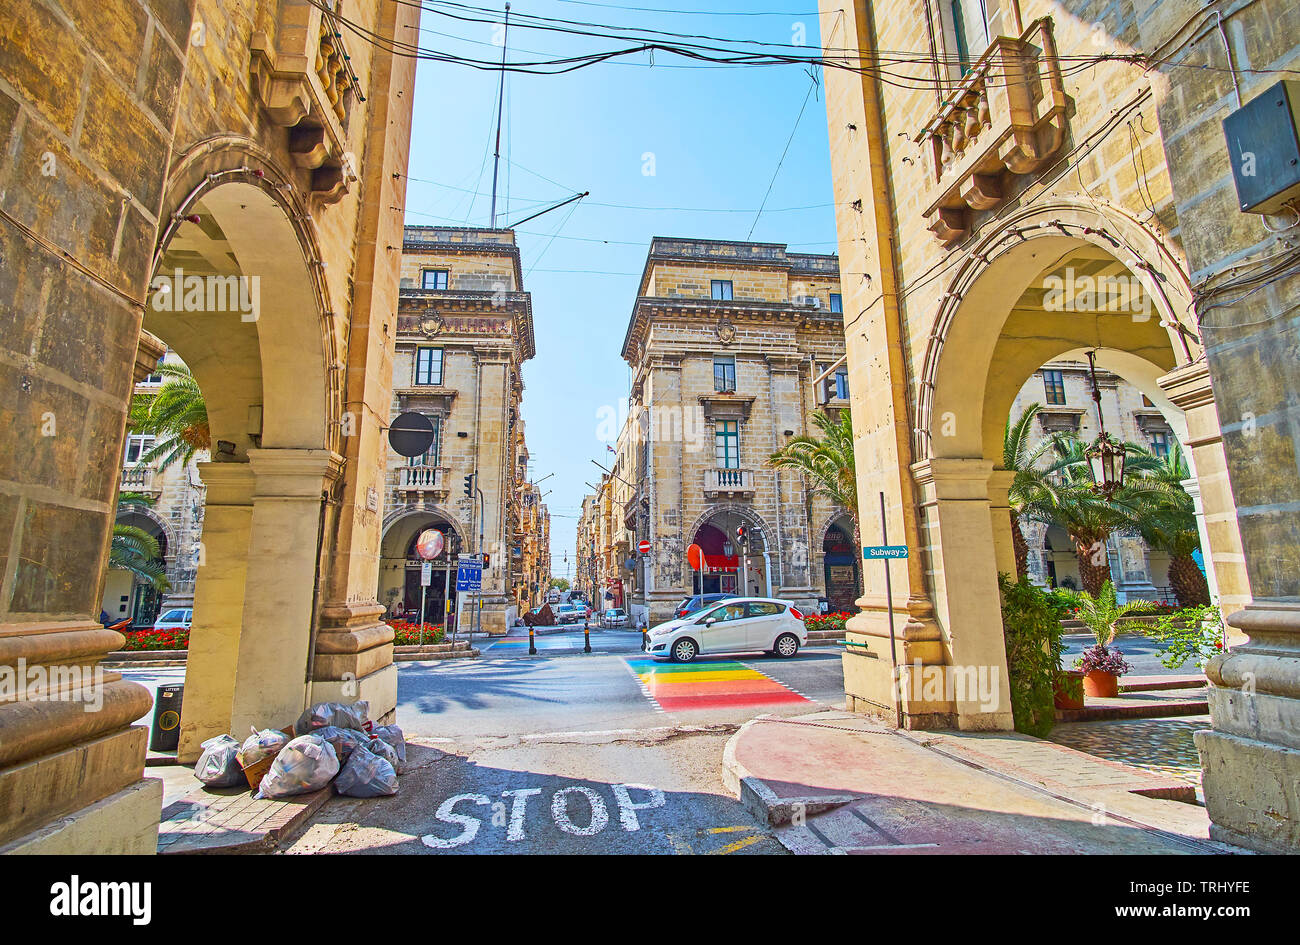 FLORIANA, MALTA - JUNE 19, 2018: The view on wide St Anne avenue through the narrow stone street, lined with historical edifices and trade arcades, on Stock Photo